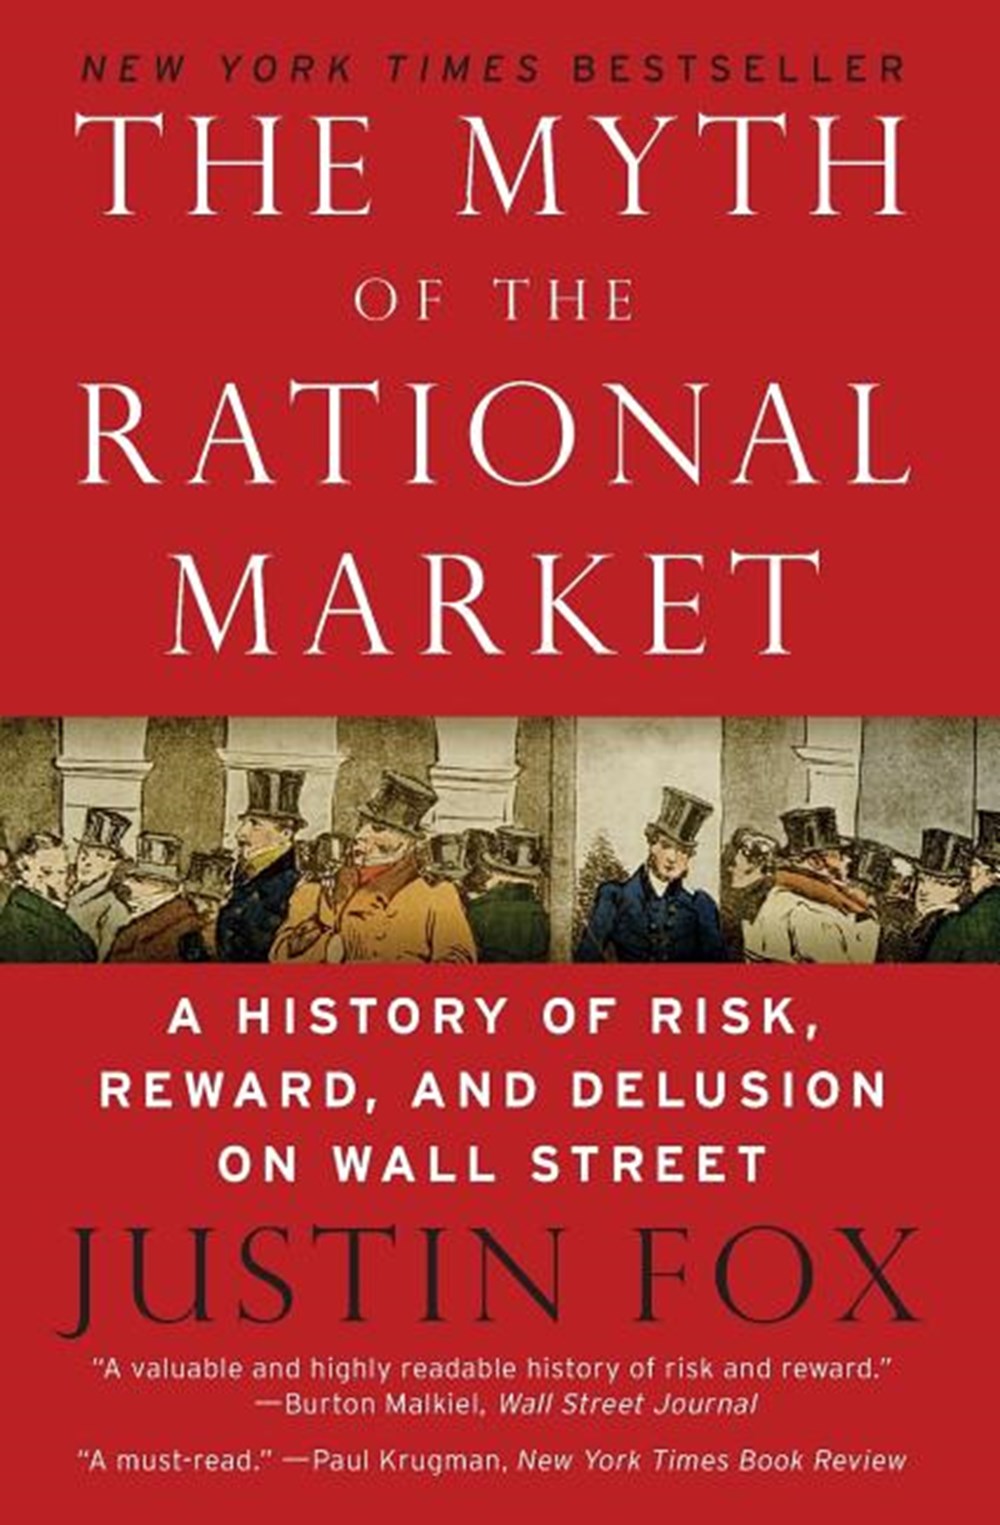 Myth of the Rational Market: A History of Risk, Reward, and Delusion on Wall Street